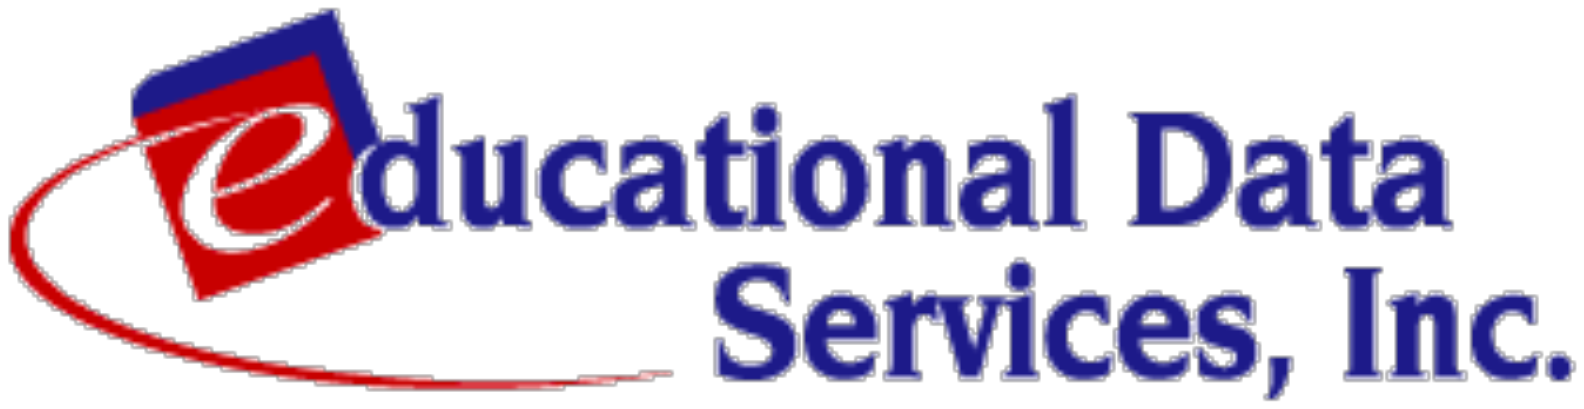 EducationServices_Logo-1